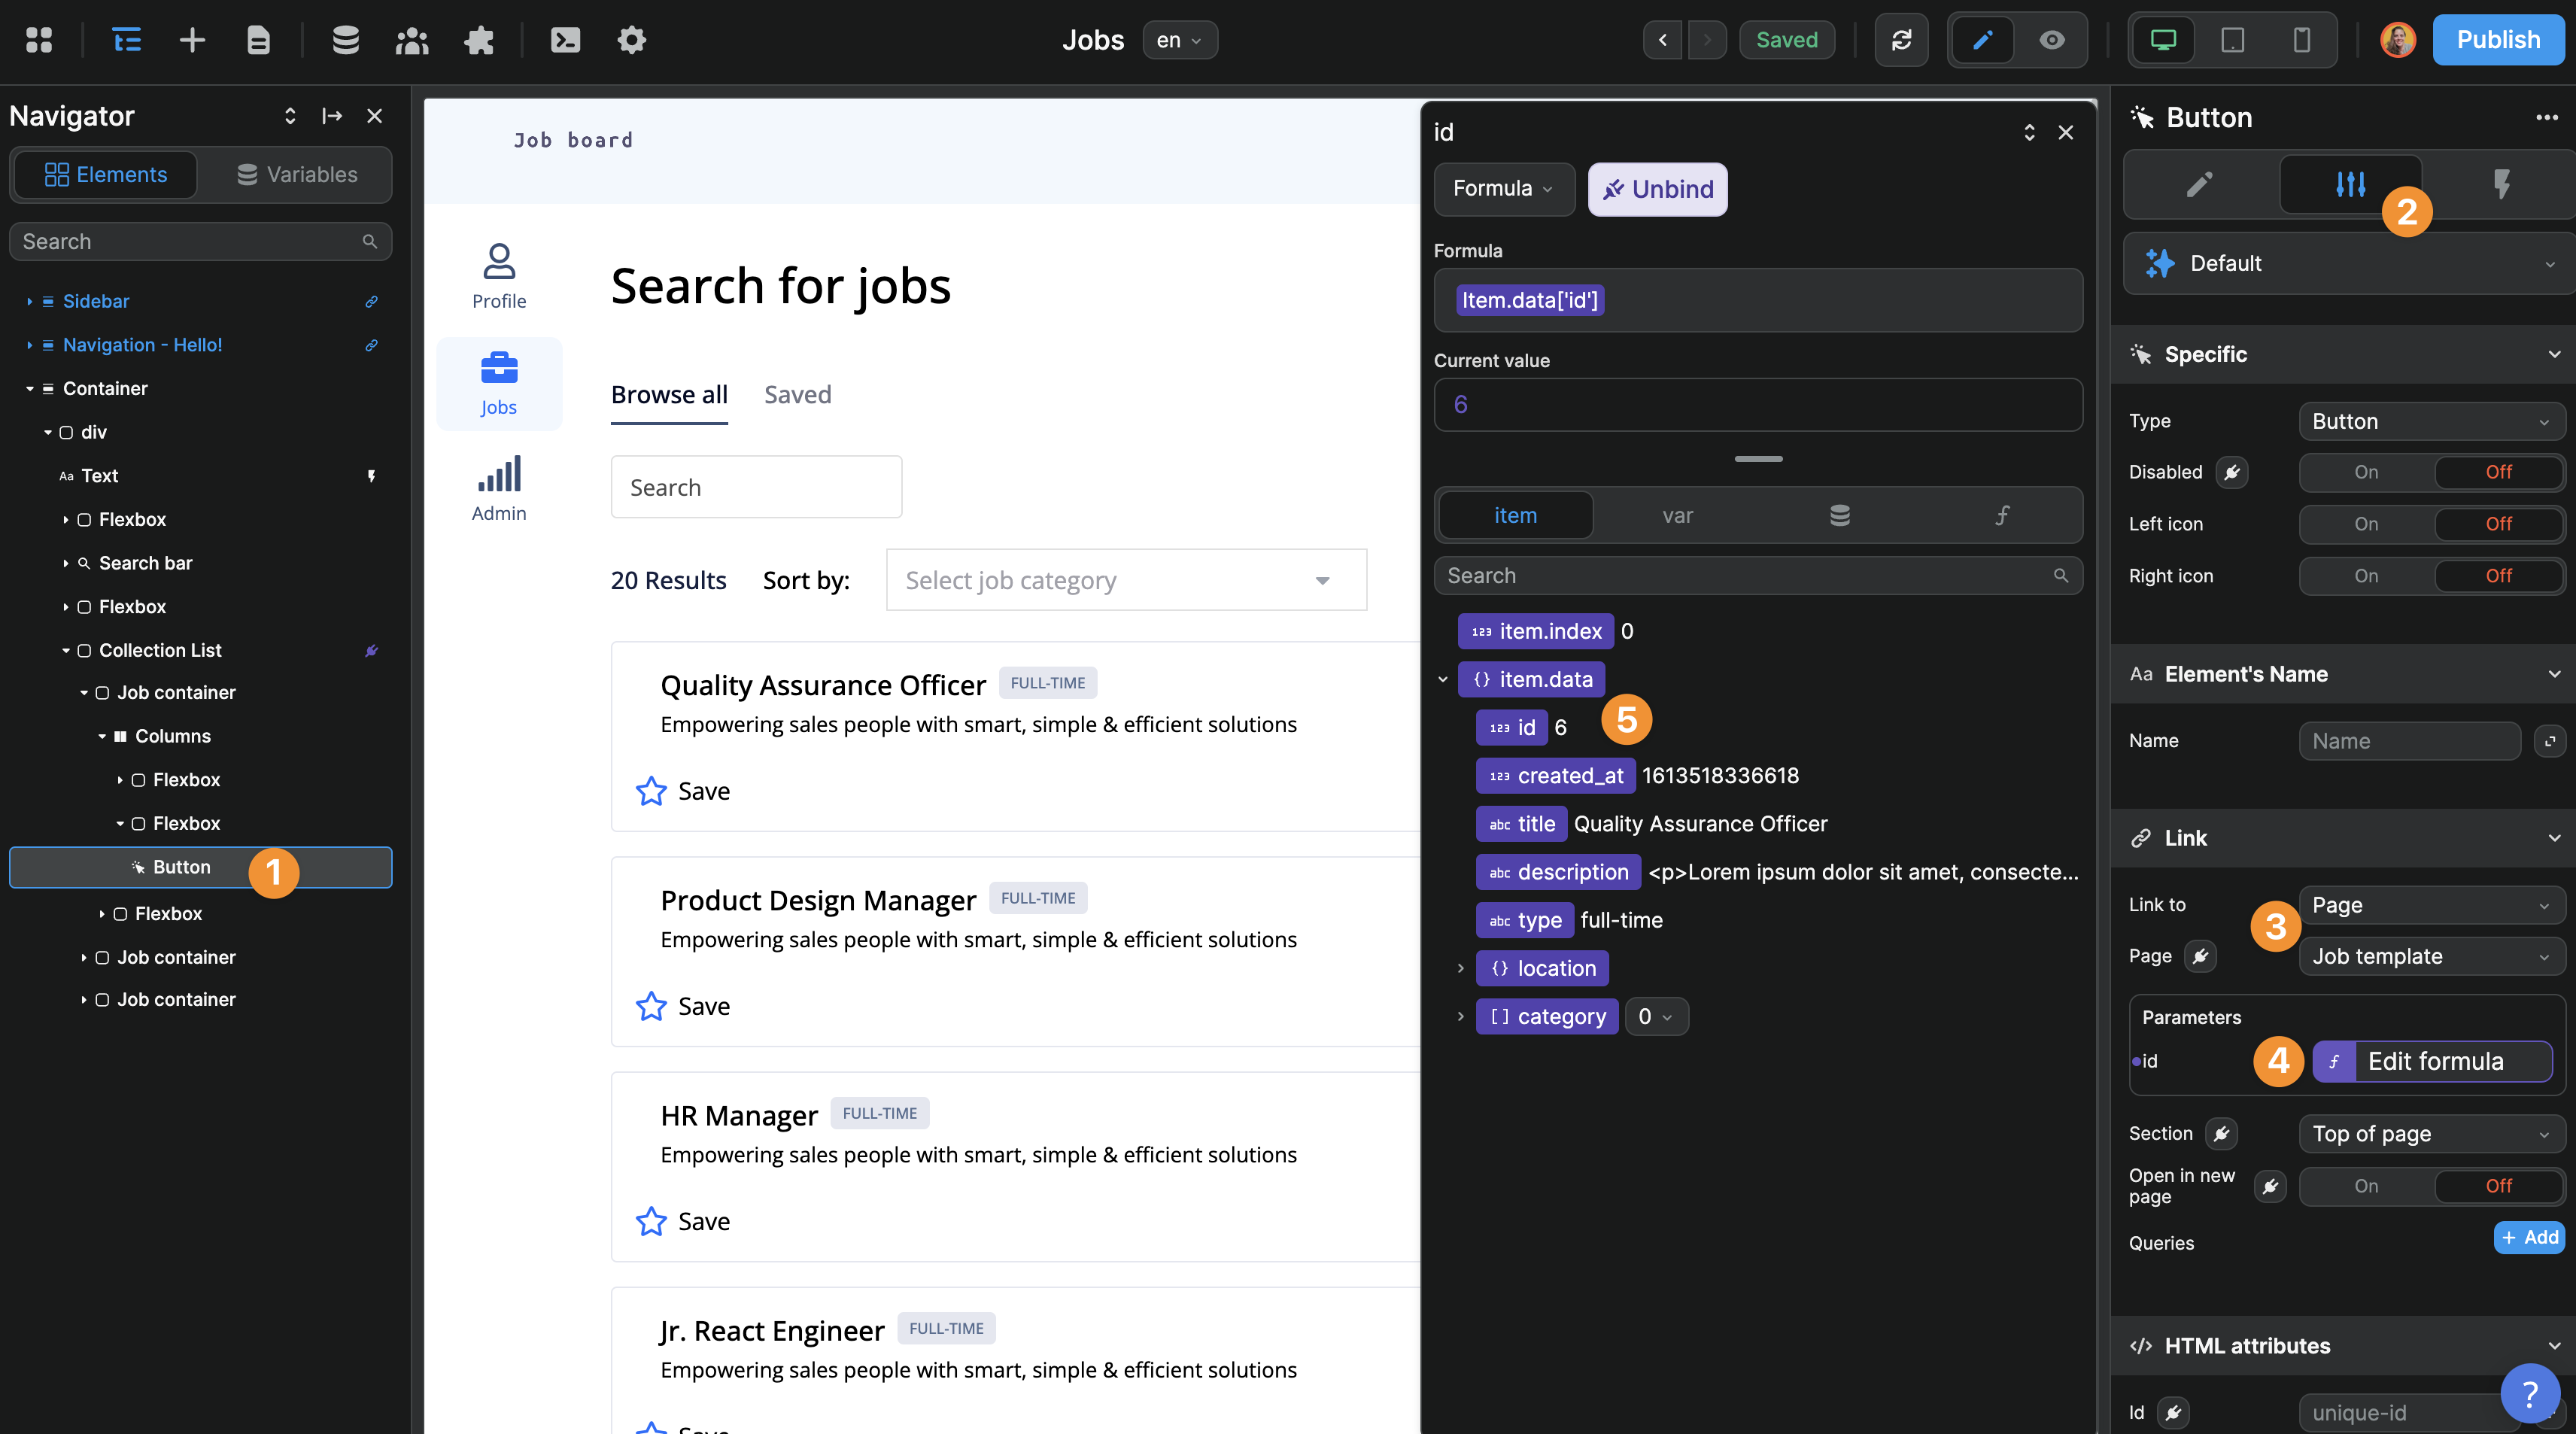 Link button to job template page